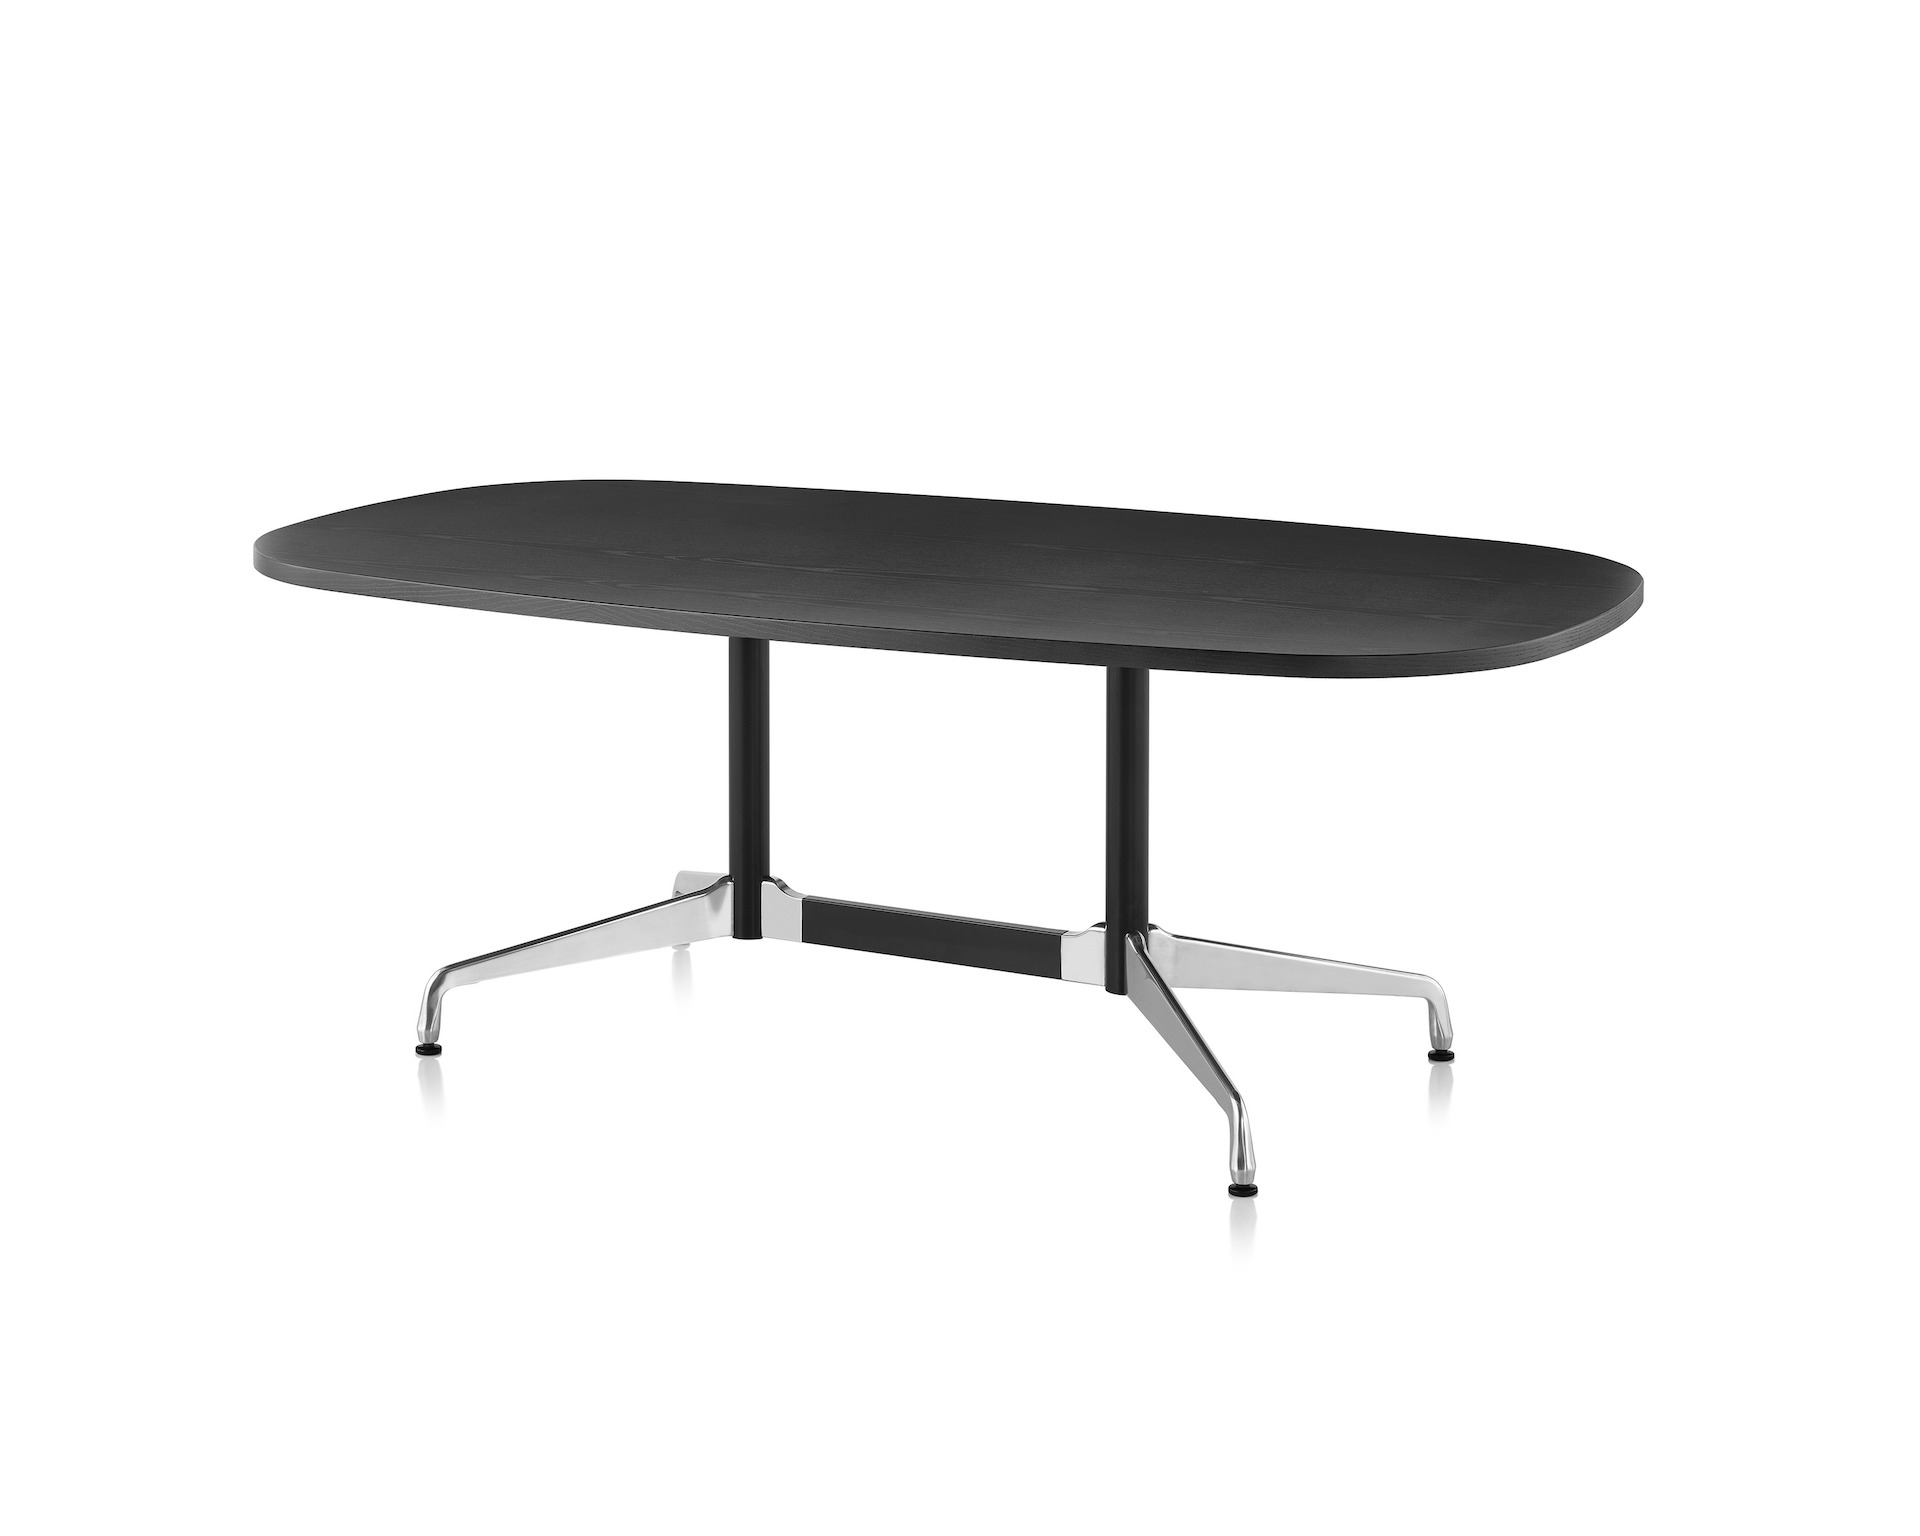 An Ebony Eames Oval Conference Table.